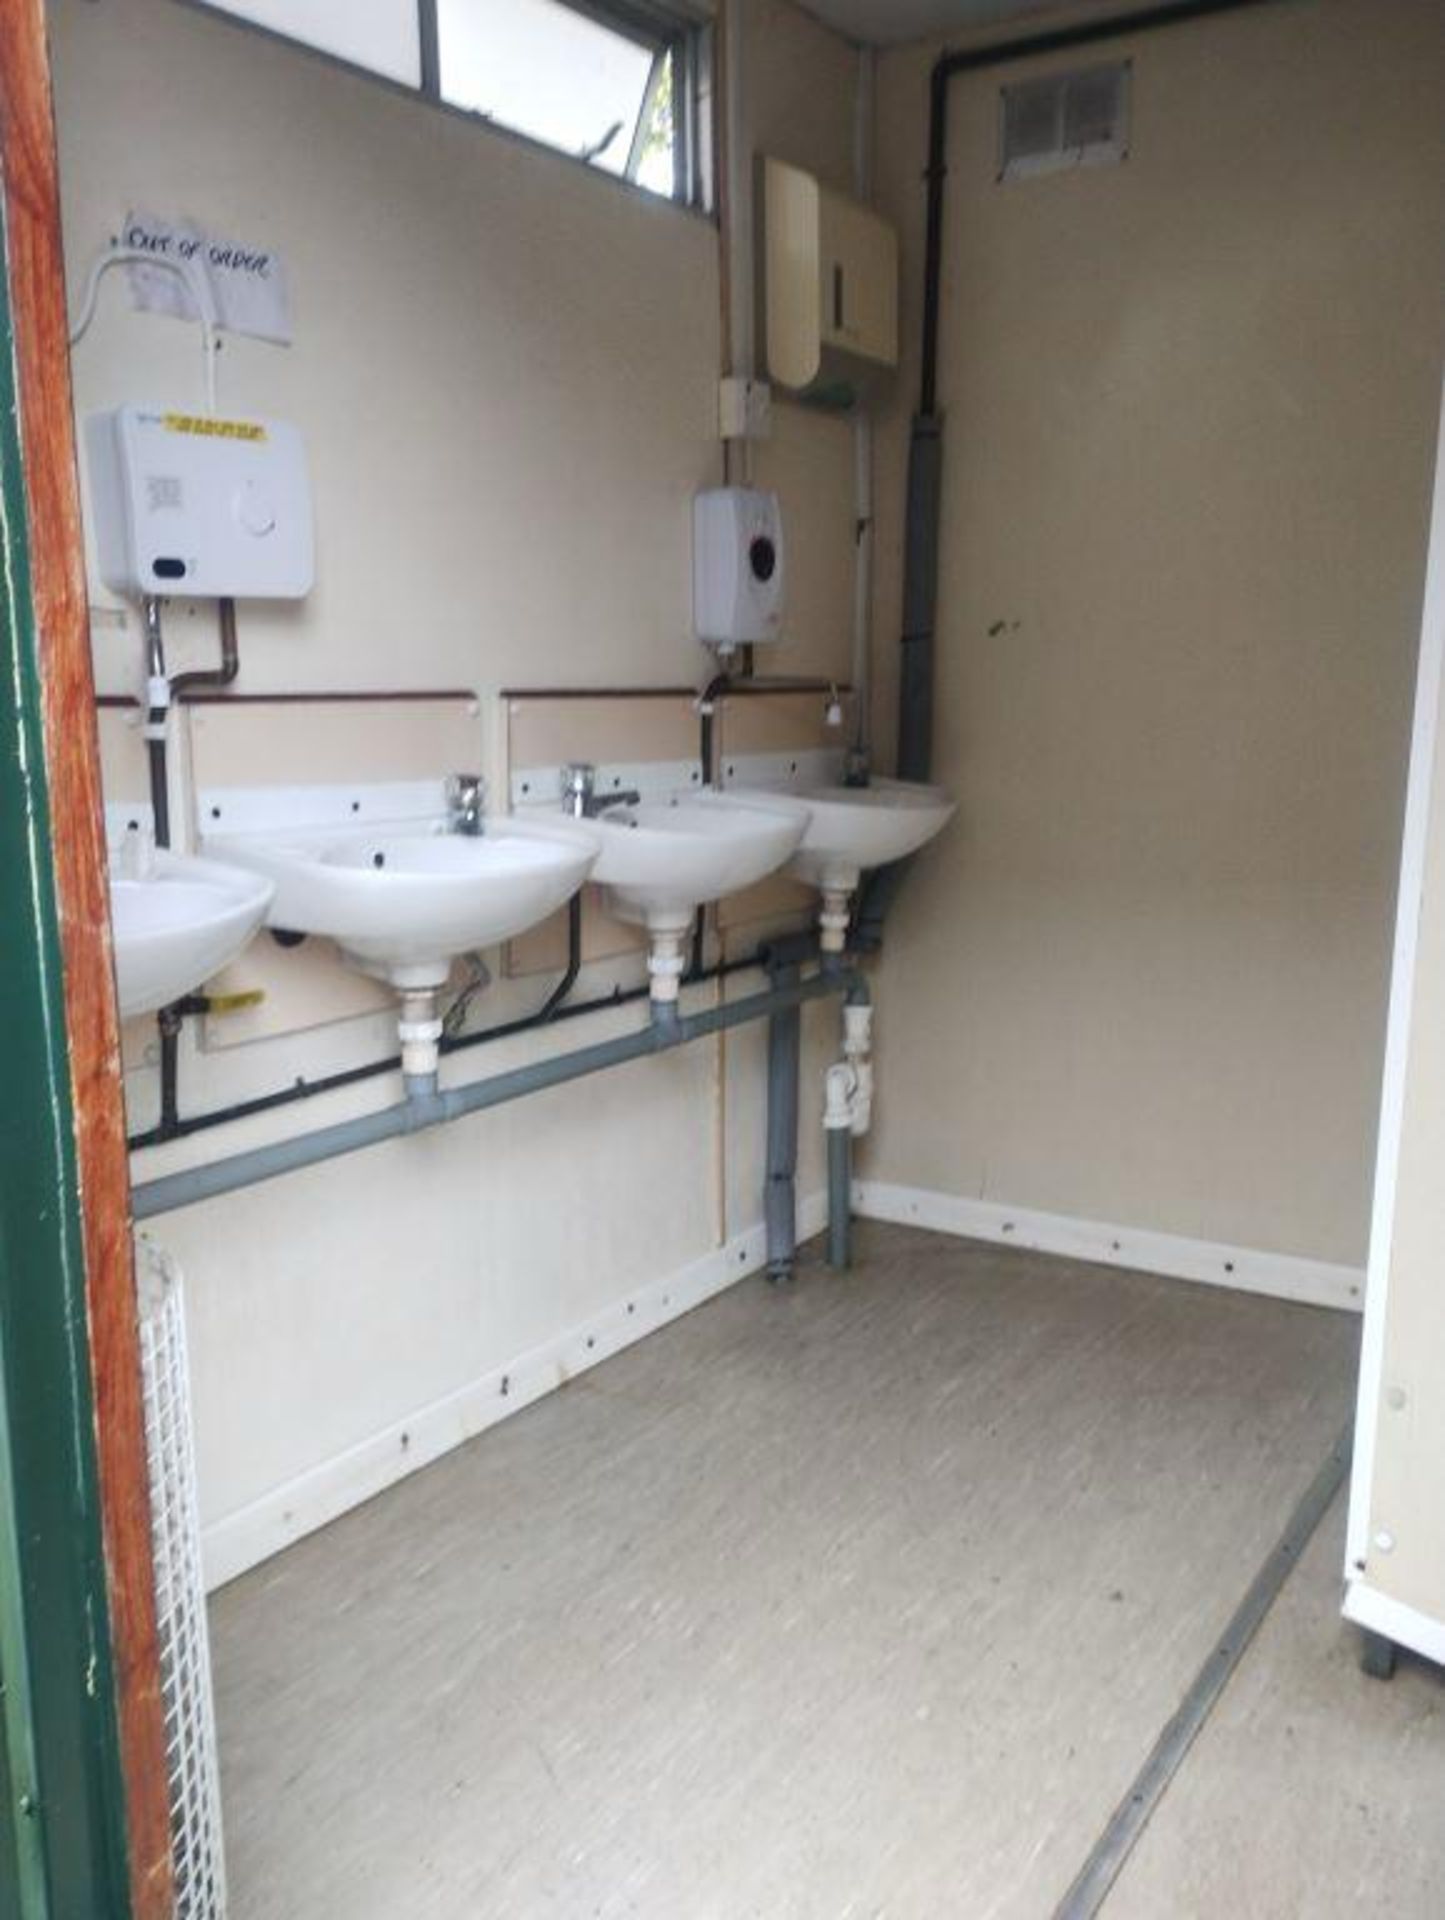 CONTAINER TRAILER TOILETS - Image 6 of 6